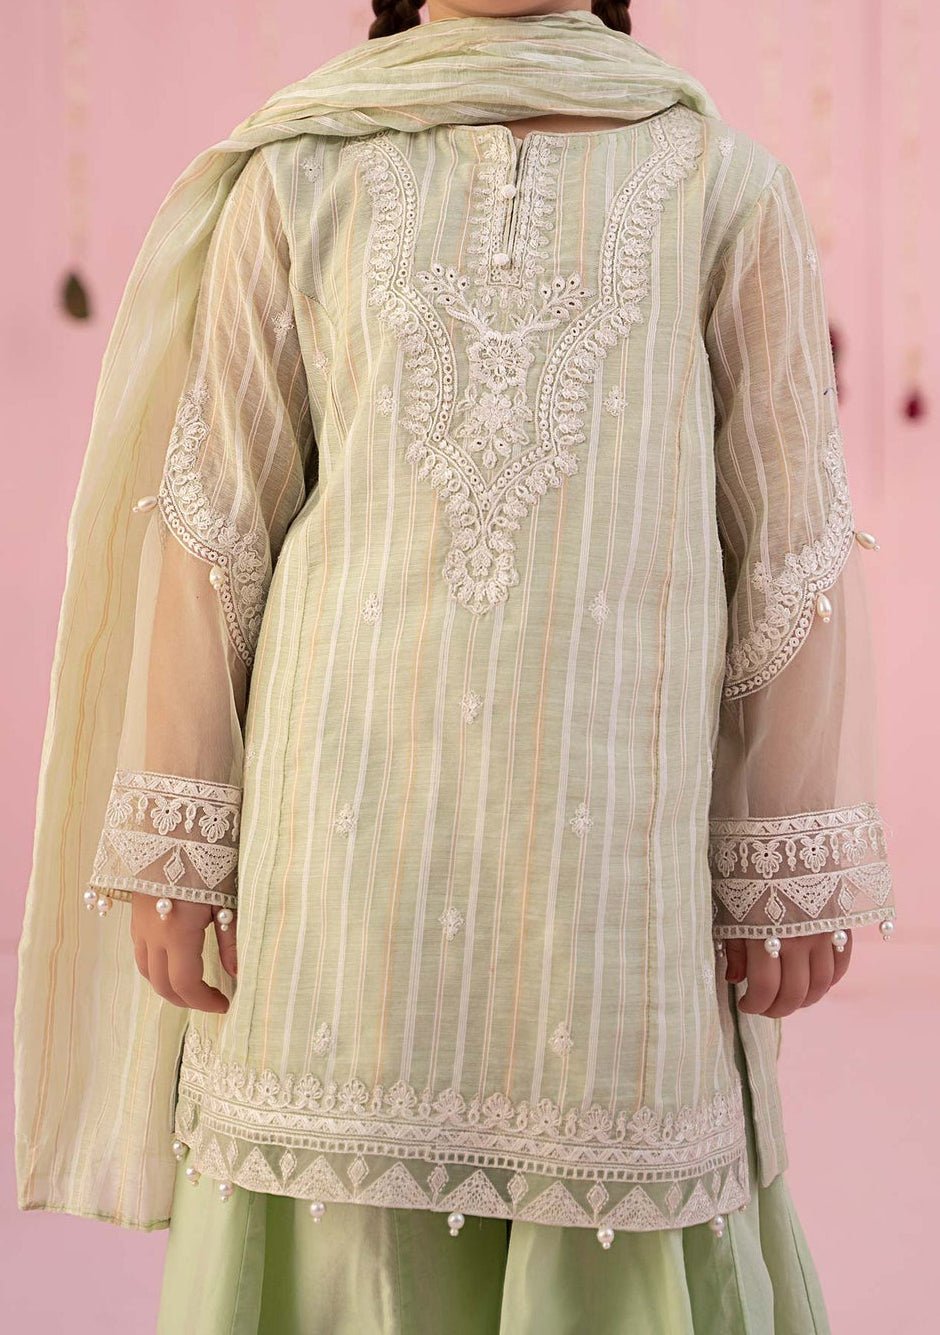 Maria.B Girl's Embroidered Cotton Palazzo Suit - db25398